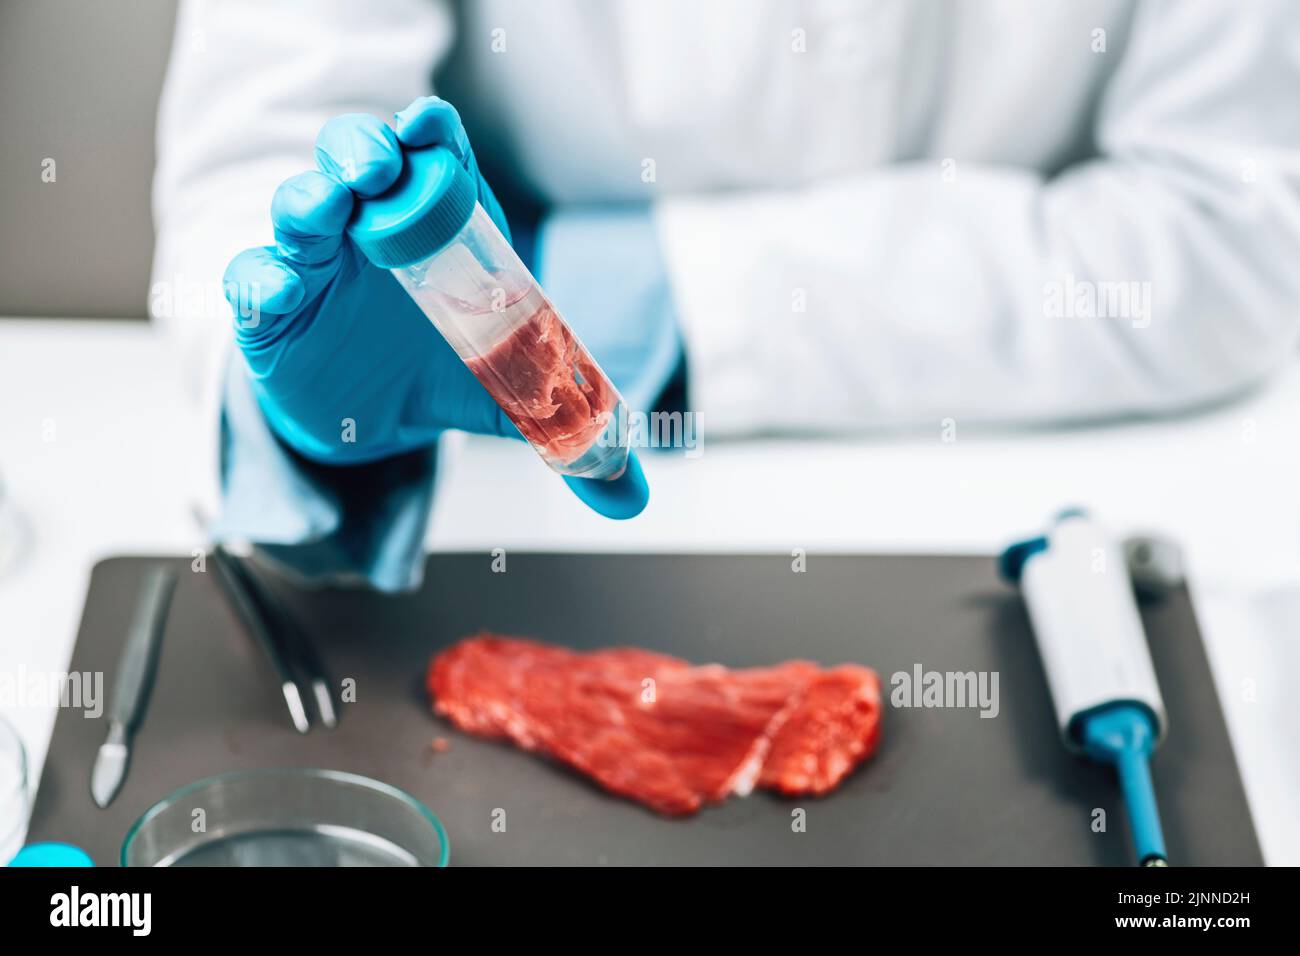 Quality control inspector taking red meat sample Stock Photo